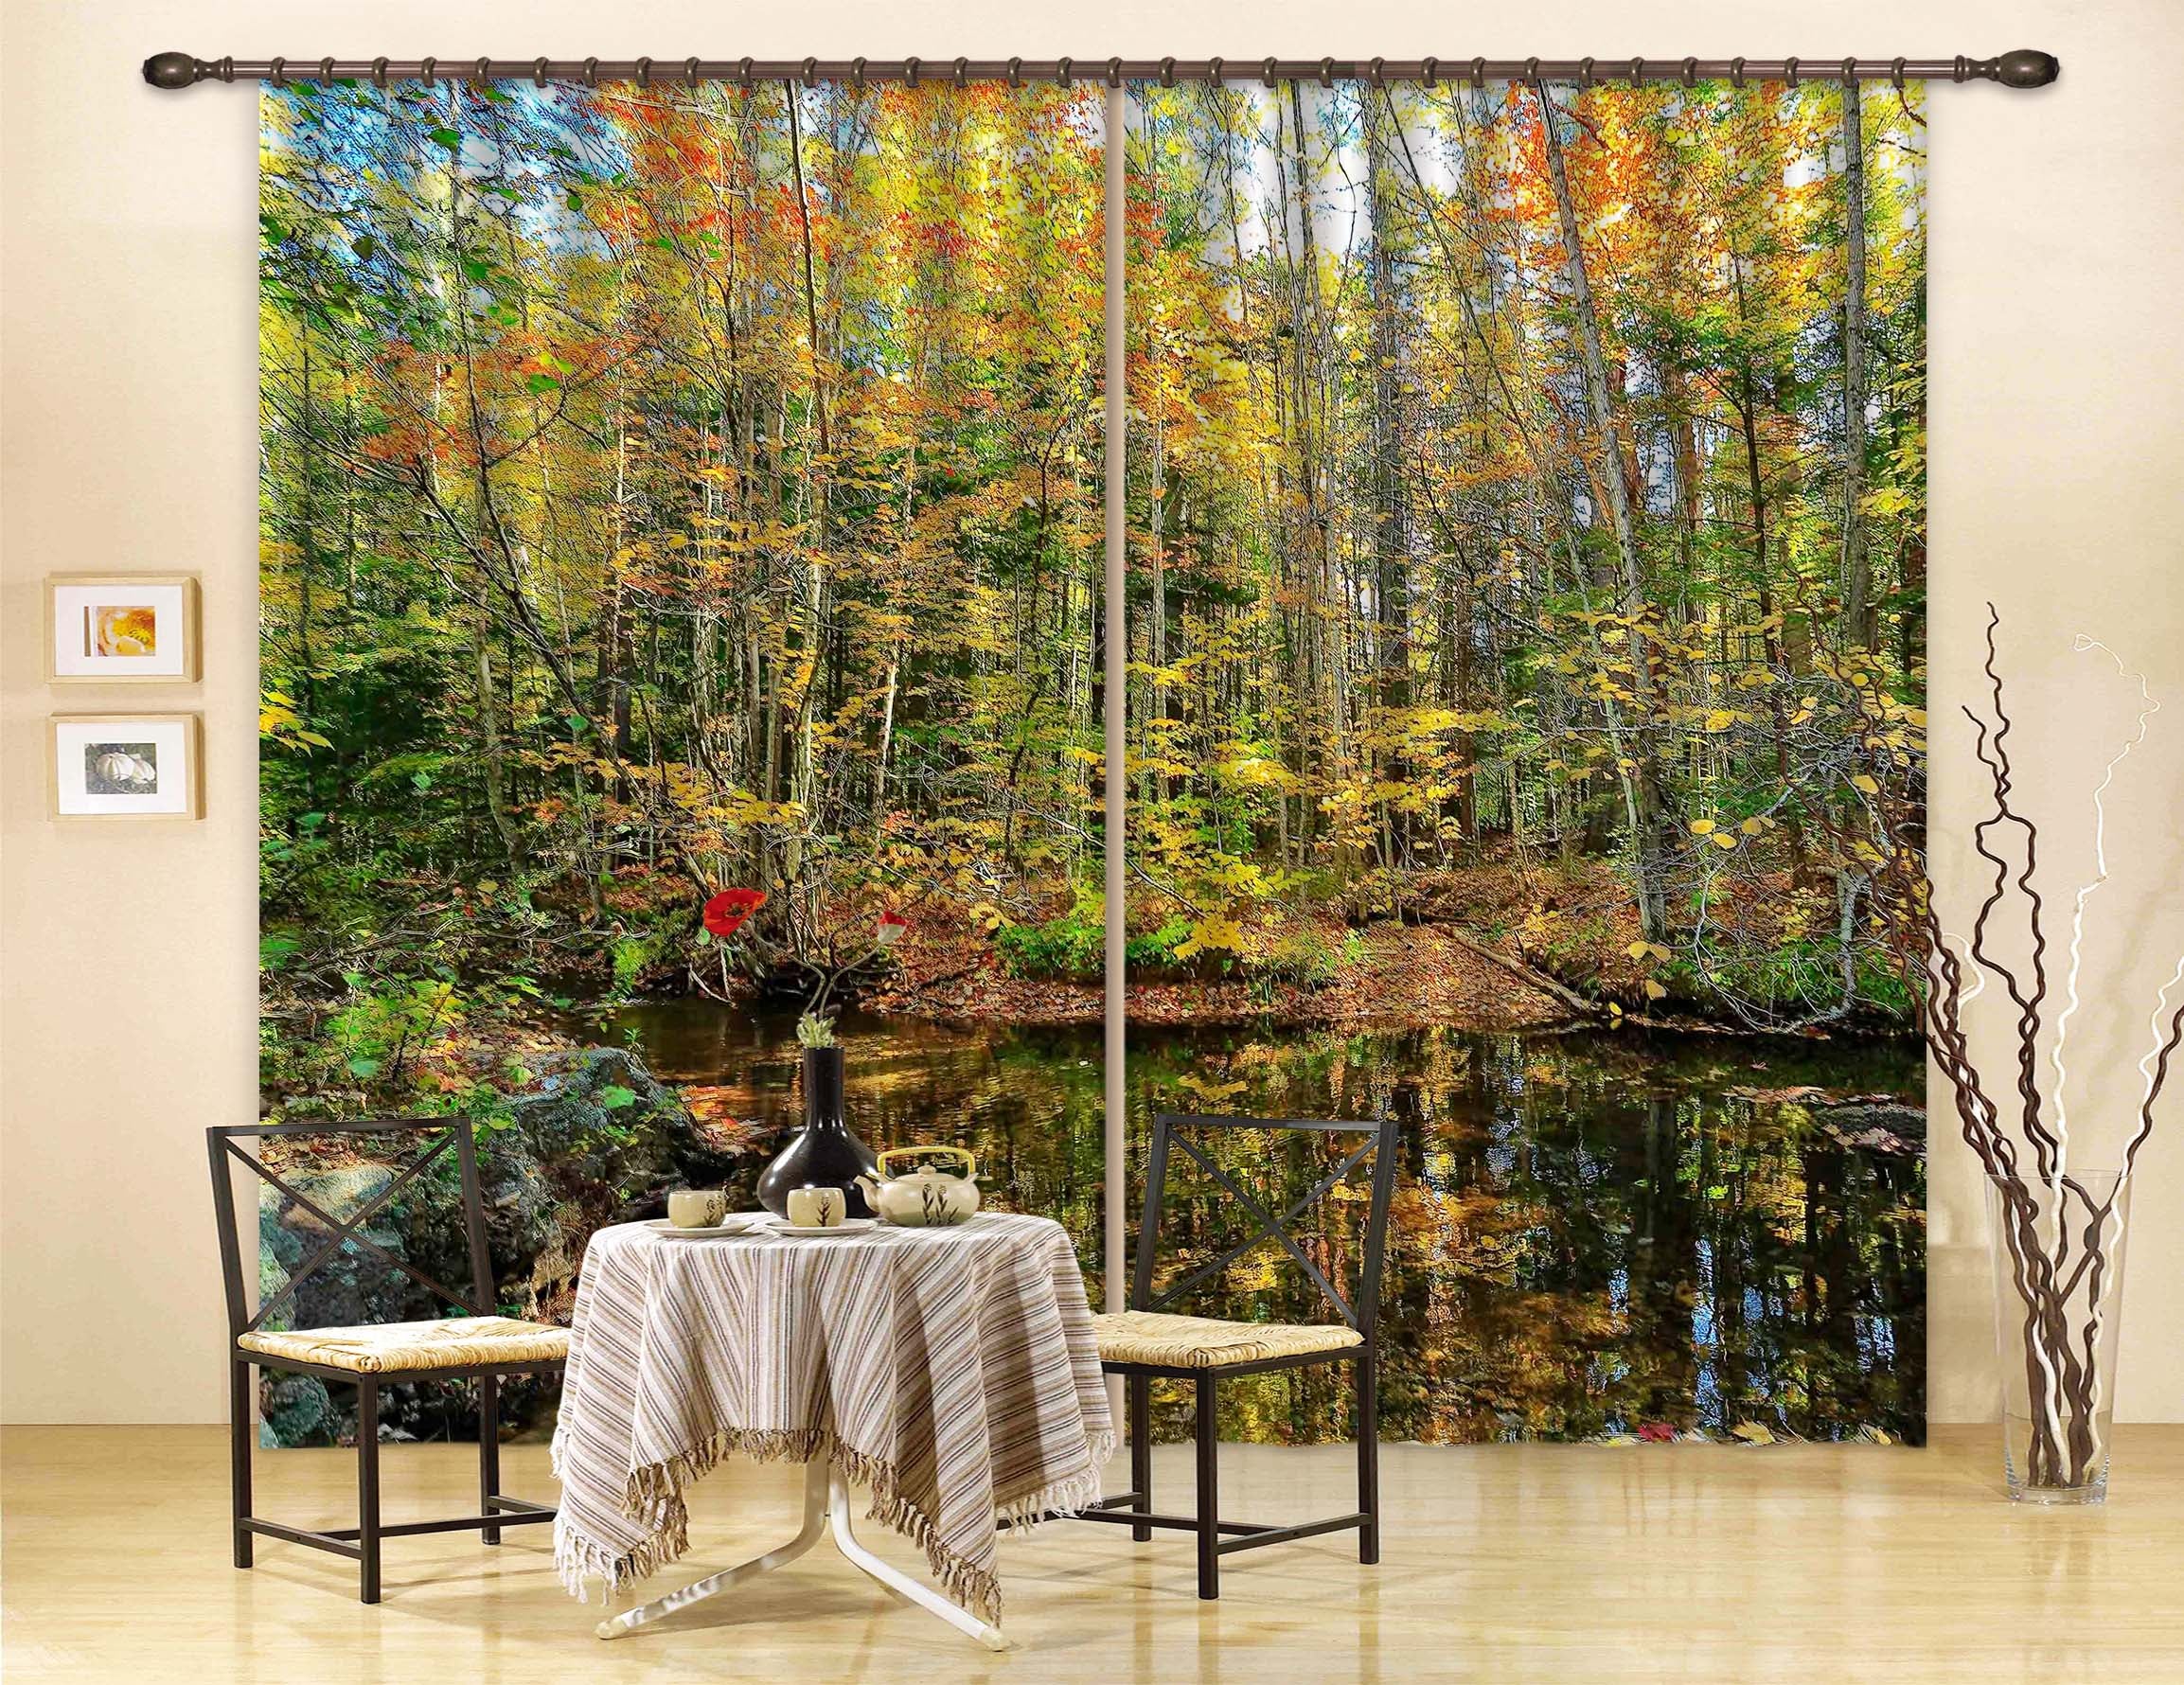 3D Pond Reflections 62159 Kathy Barefield Curtain Curtains Drapes